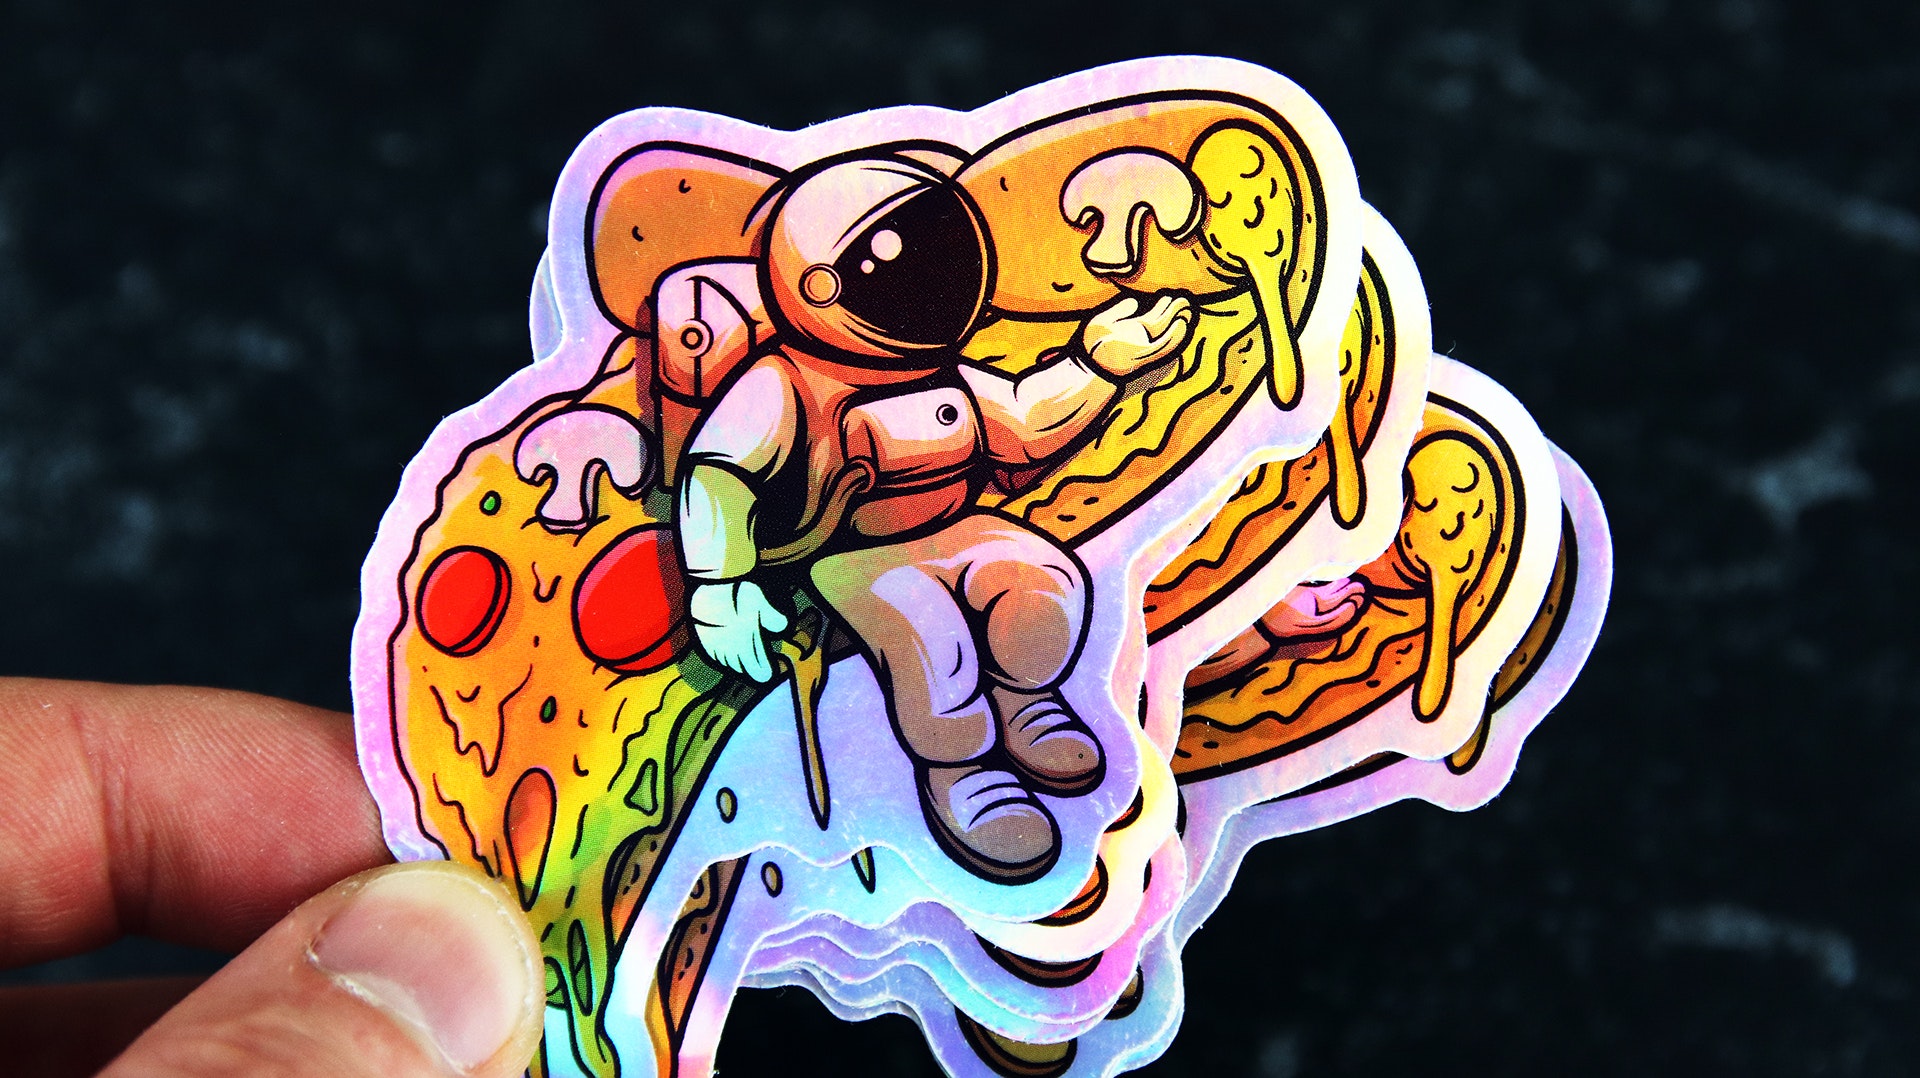 Die cut holographic sticker with pizza astronaut design hand held